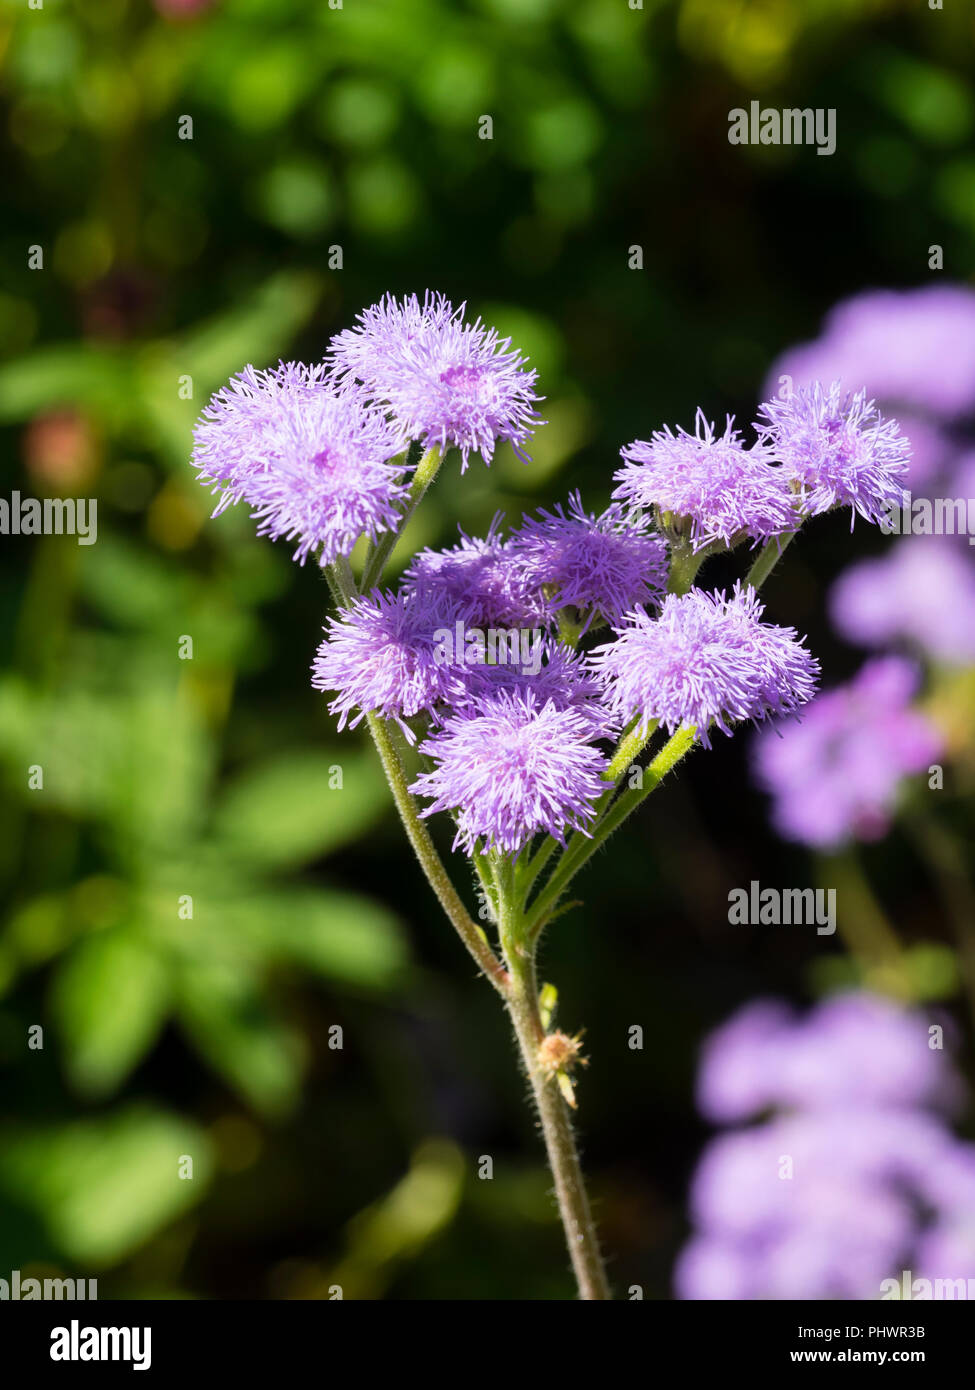 Lavender coloured flowers of the tender annual floss flower, Ageratum houstonianum 'Timeless Mixed' Stock Photo